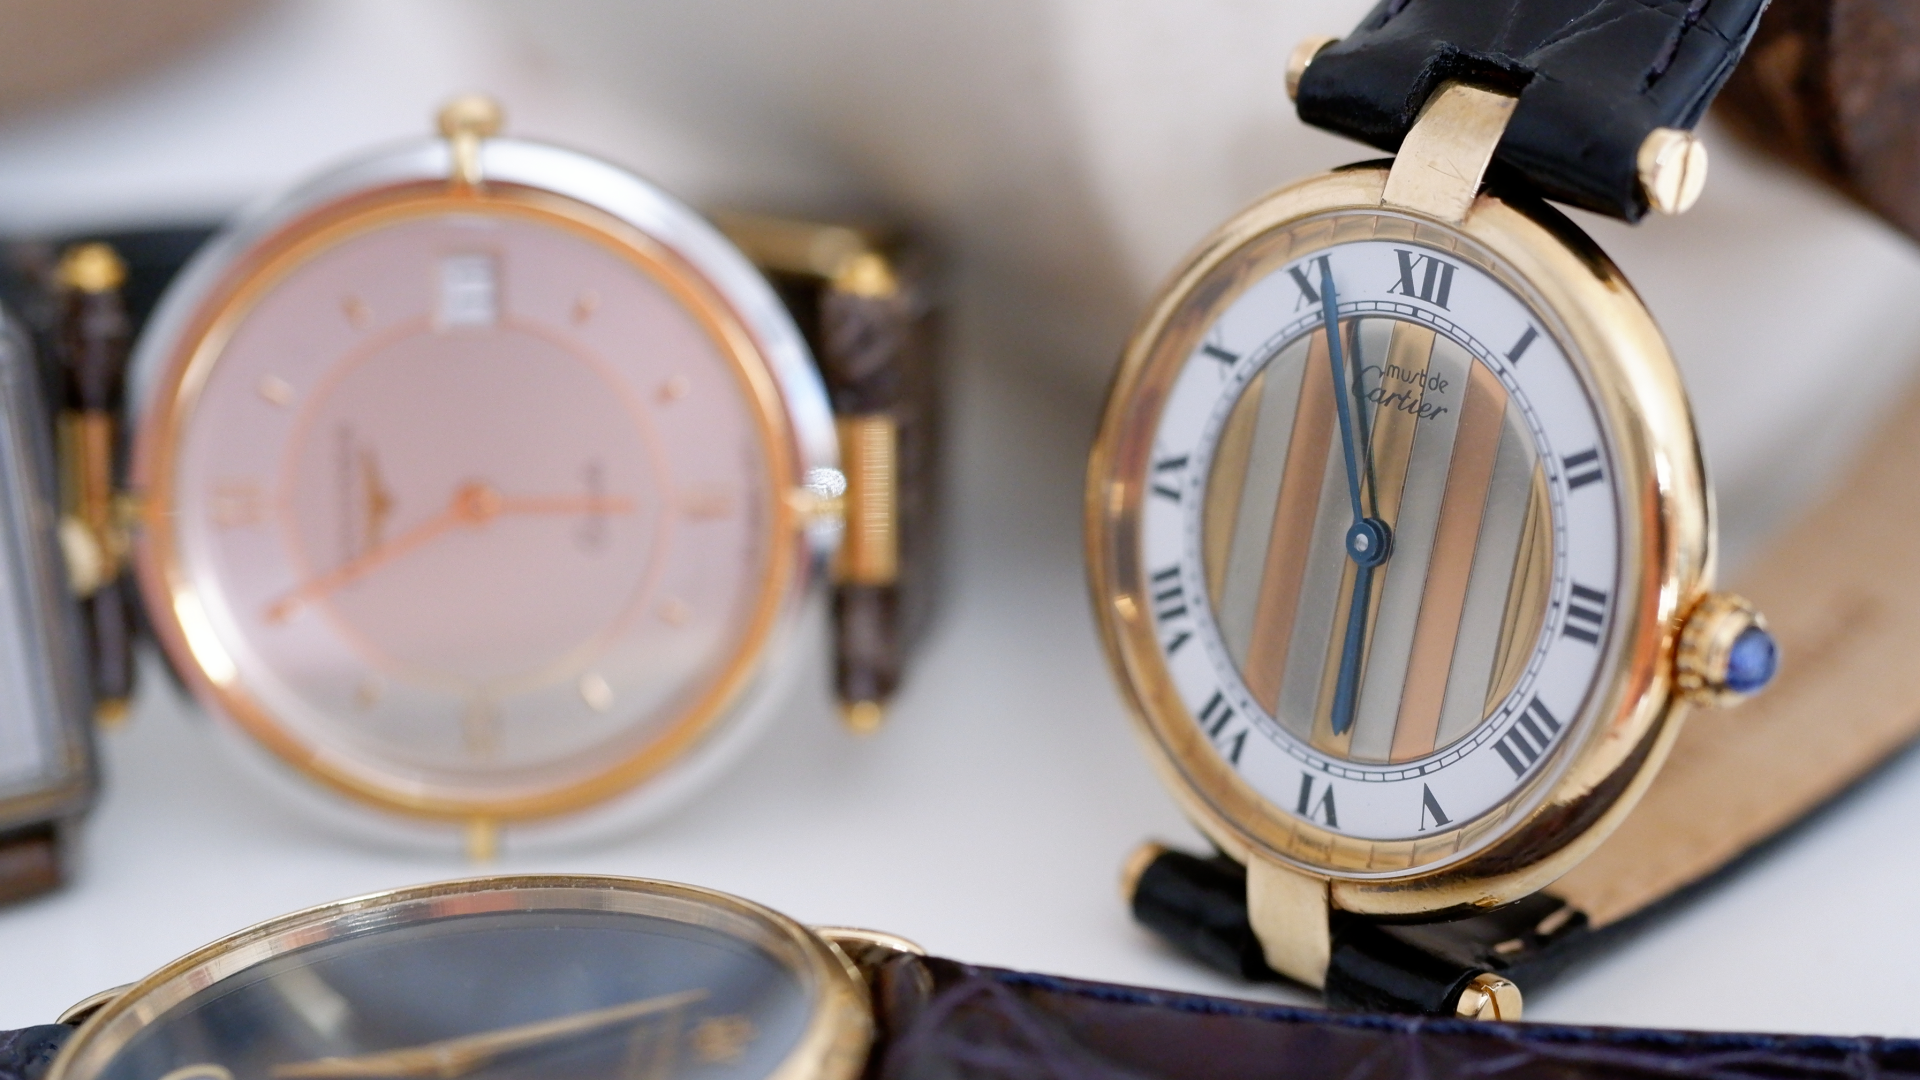 Artistic Image of a Cartier Ladies Vintage Watch in Gold with a Longine Ladies Vintage Watch in the Background